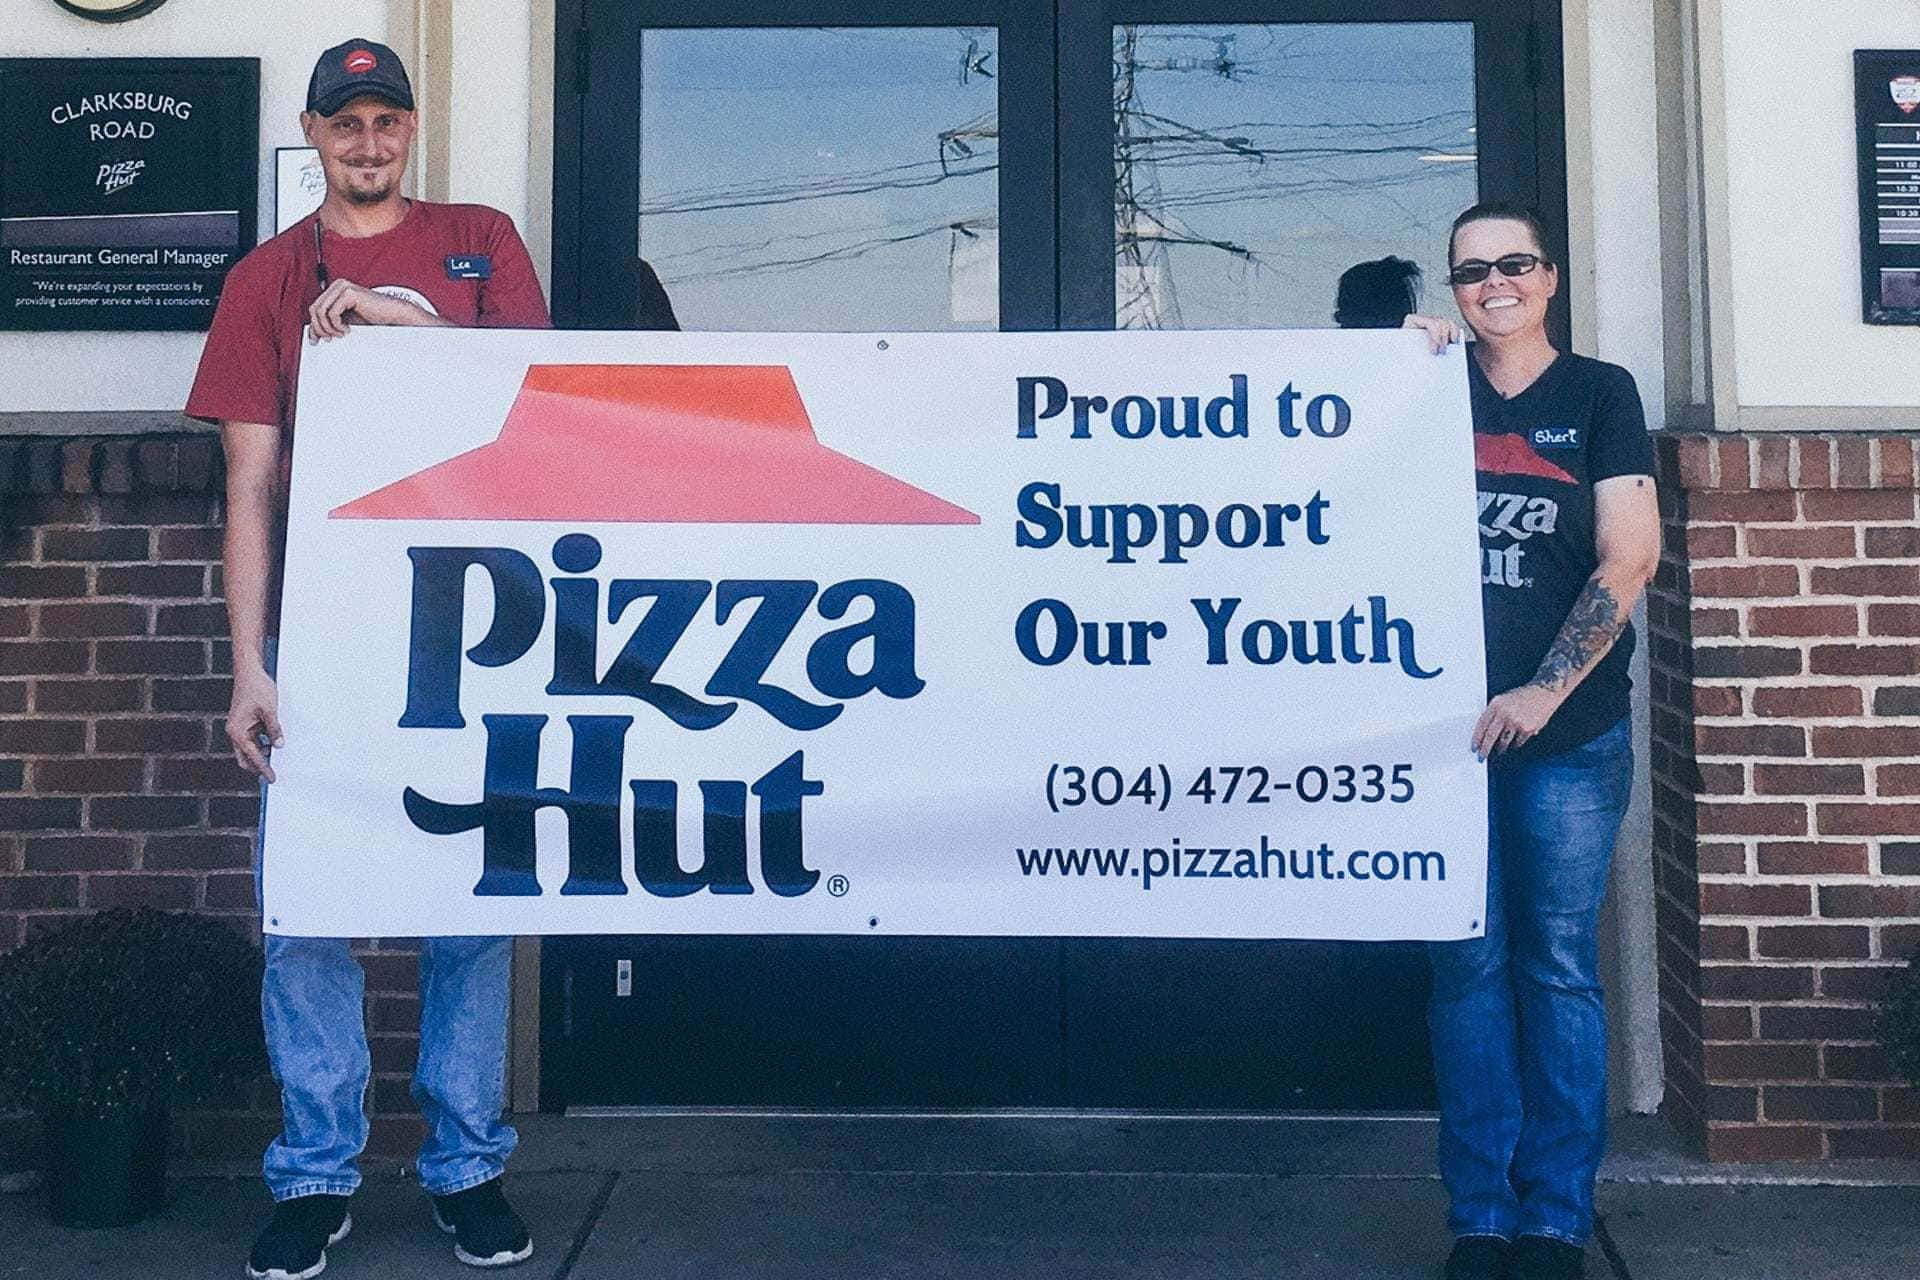 Buckhannon Pizza Hut supports Buckhannon-Upshur High School reading and literacy, as well as other schools, sports teams and clubs in the area. Pictured with their banner are employees Lee Swisher and Sheri Castellani.